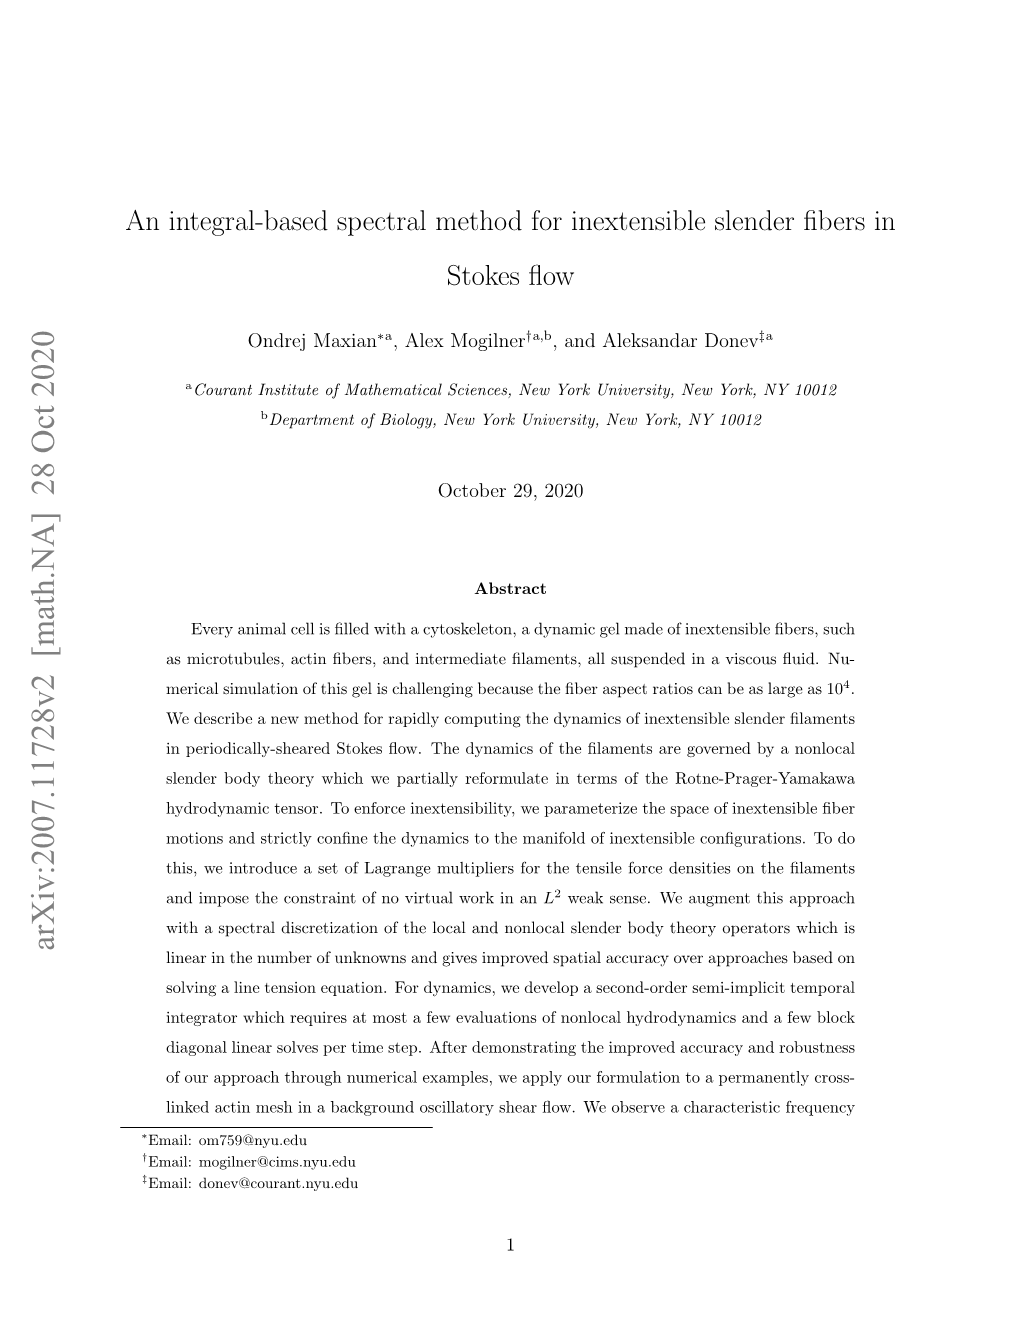 Arxiv:2007.11728V2 [Math.NA] 28 Oct 2020 Linear in the Number of Unknowns and Gives Improved Spatial Accuracy Over Approaches Based on Solving a Line Tension Equation